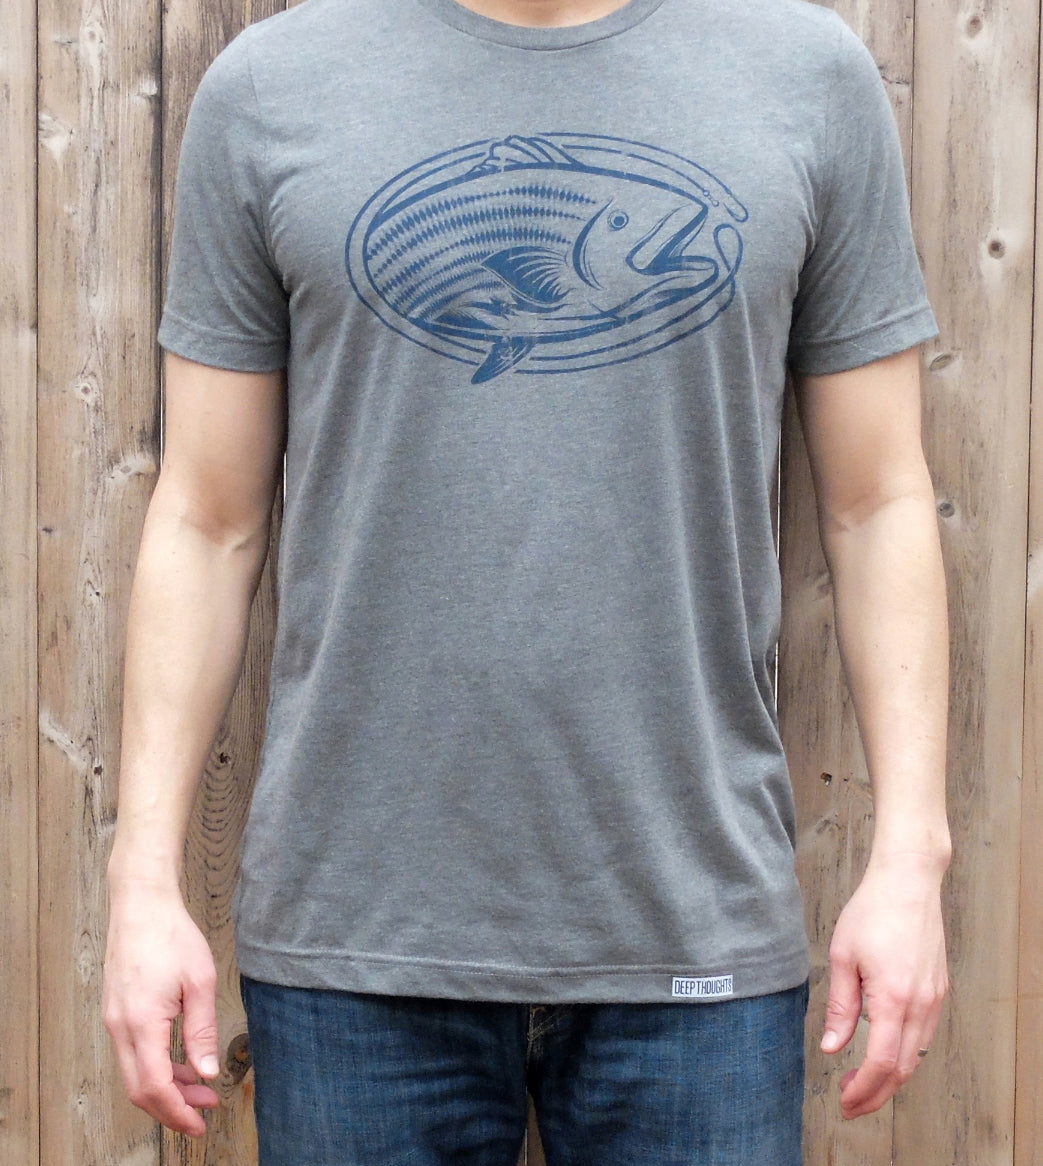 man wearing dark heather grey t-shirt with blue oval shaped striped bass fishing graphic